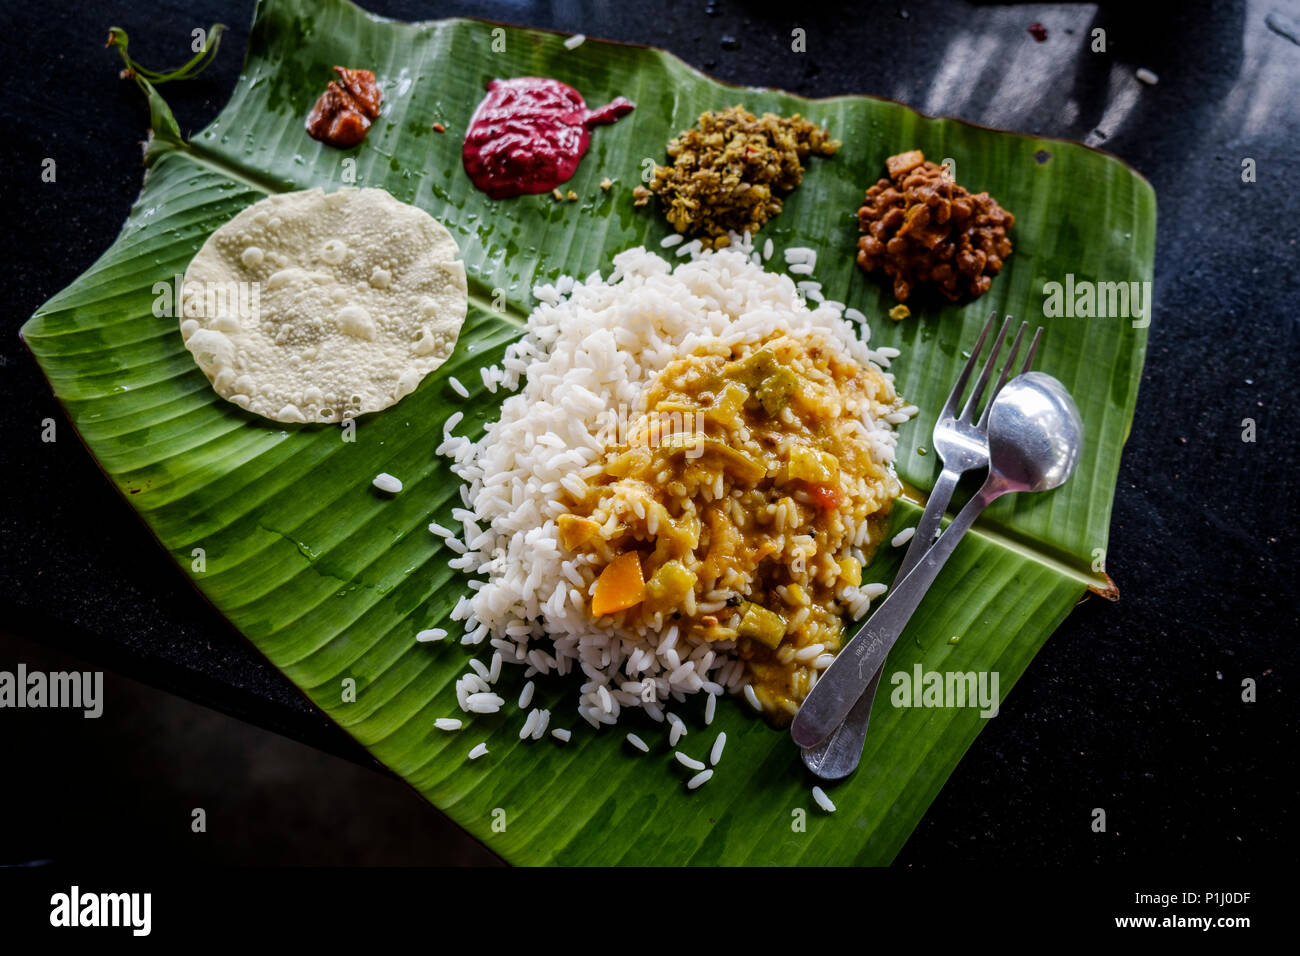 Sadya, the Kerala version of 'thali', a typical South India meal of rice, sambar (lentil stew), chutneys and pickles served on a banana leaf. Stock Photo